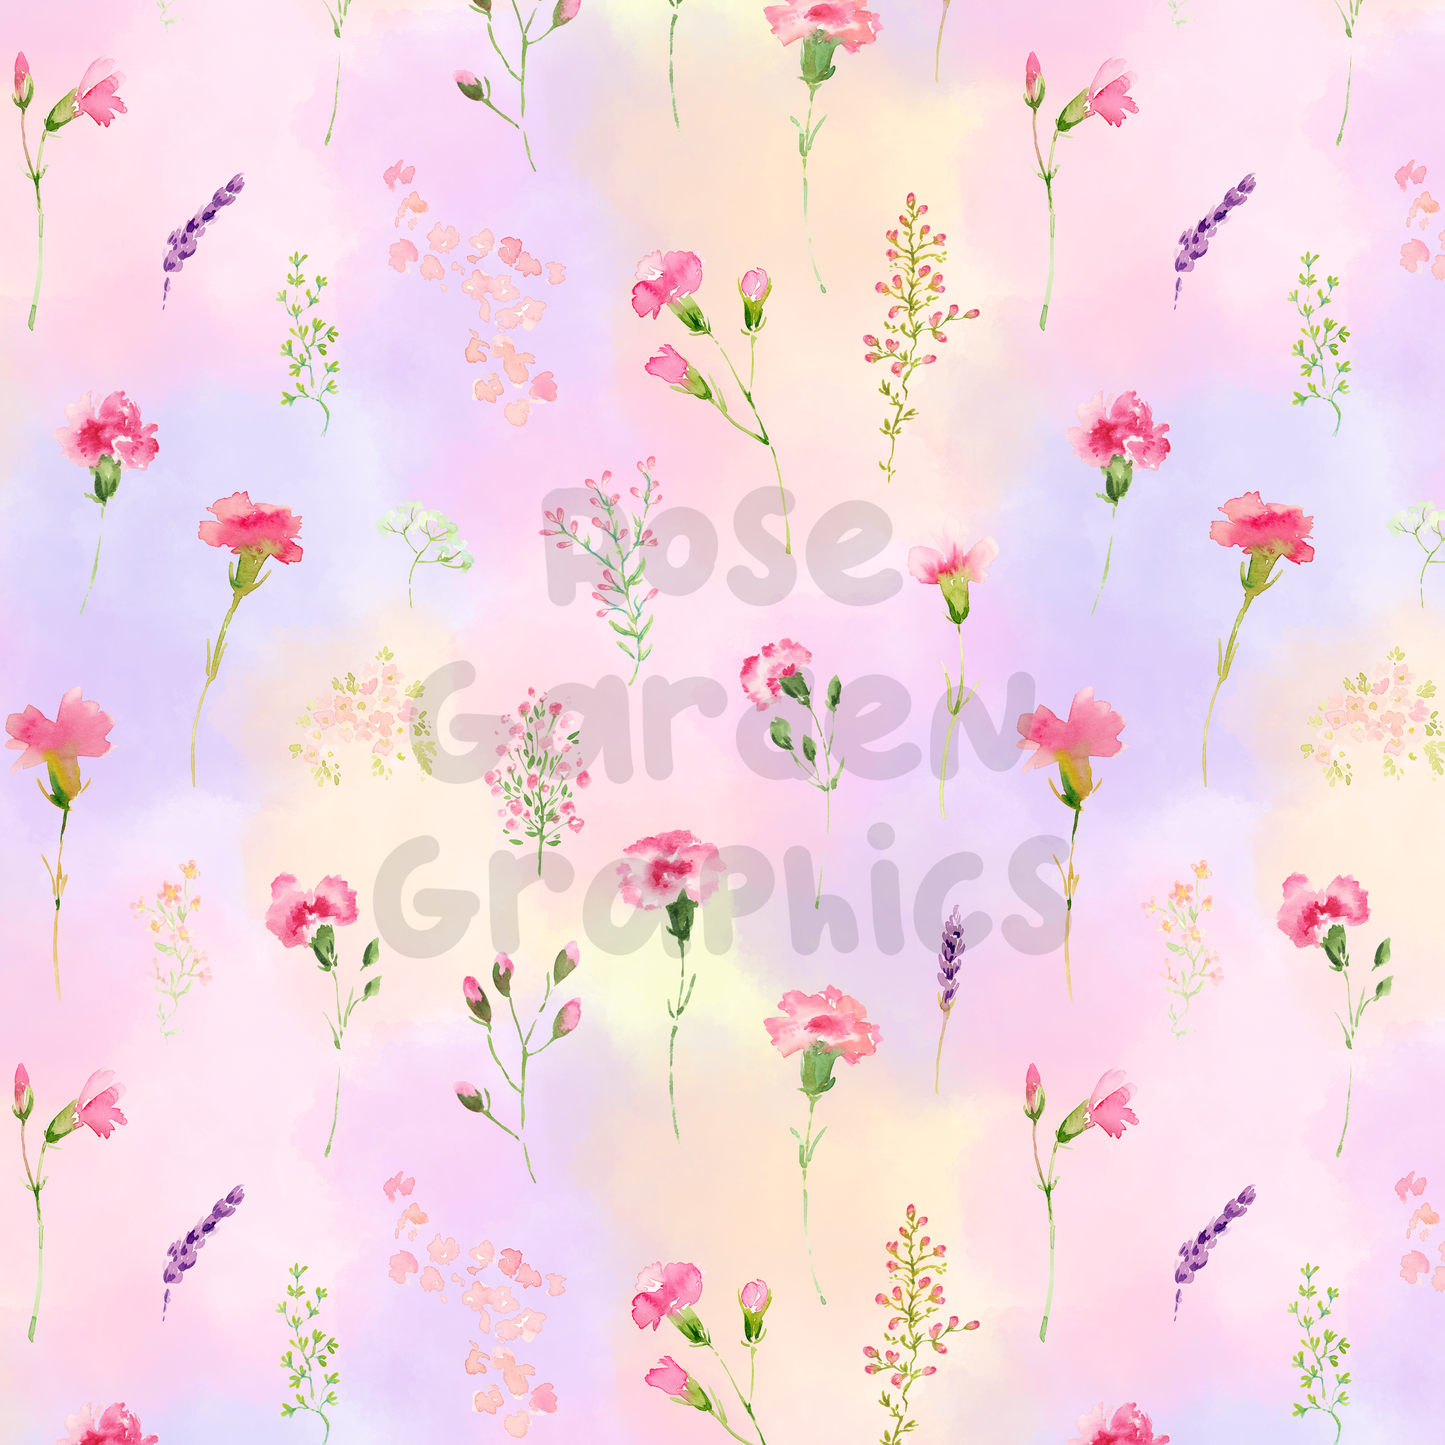 Floral Meadow Seamless Image